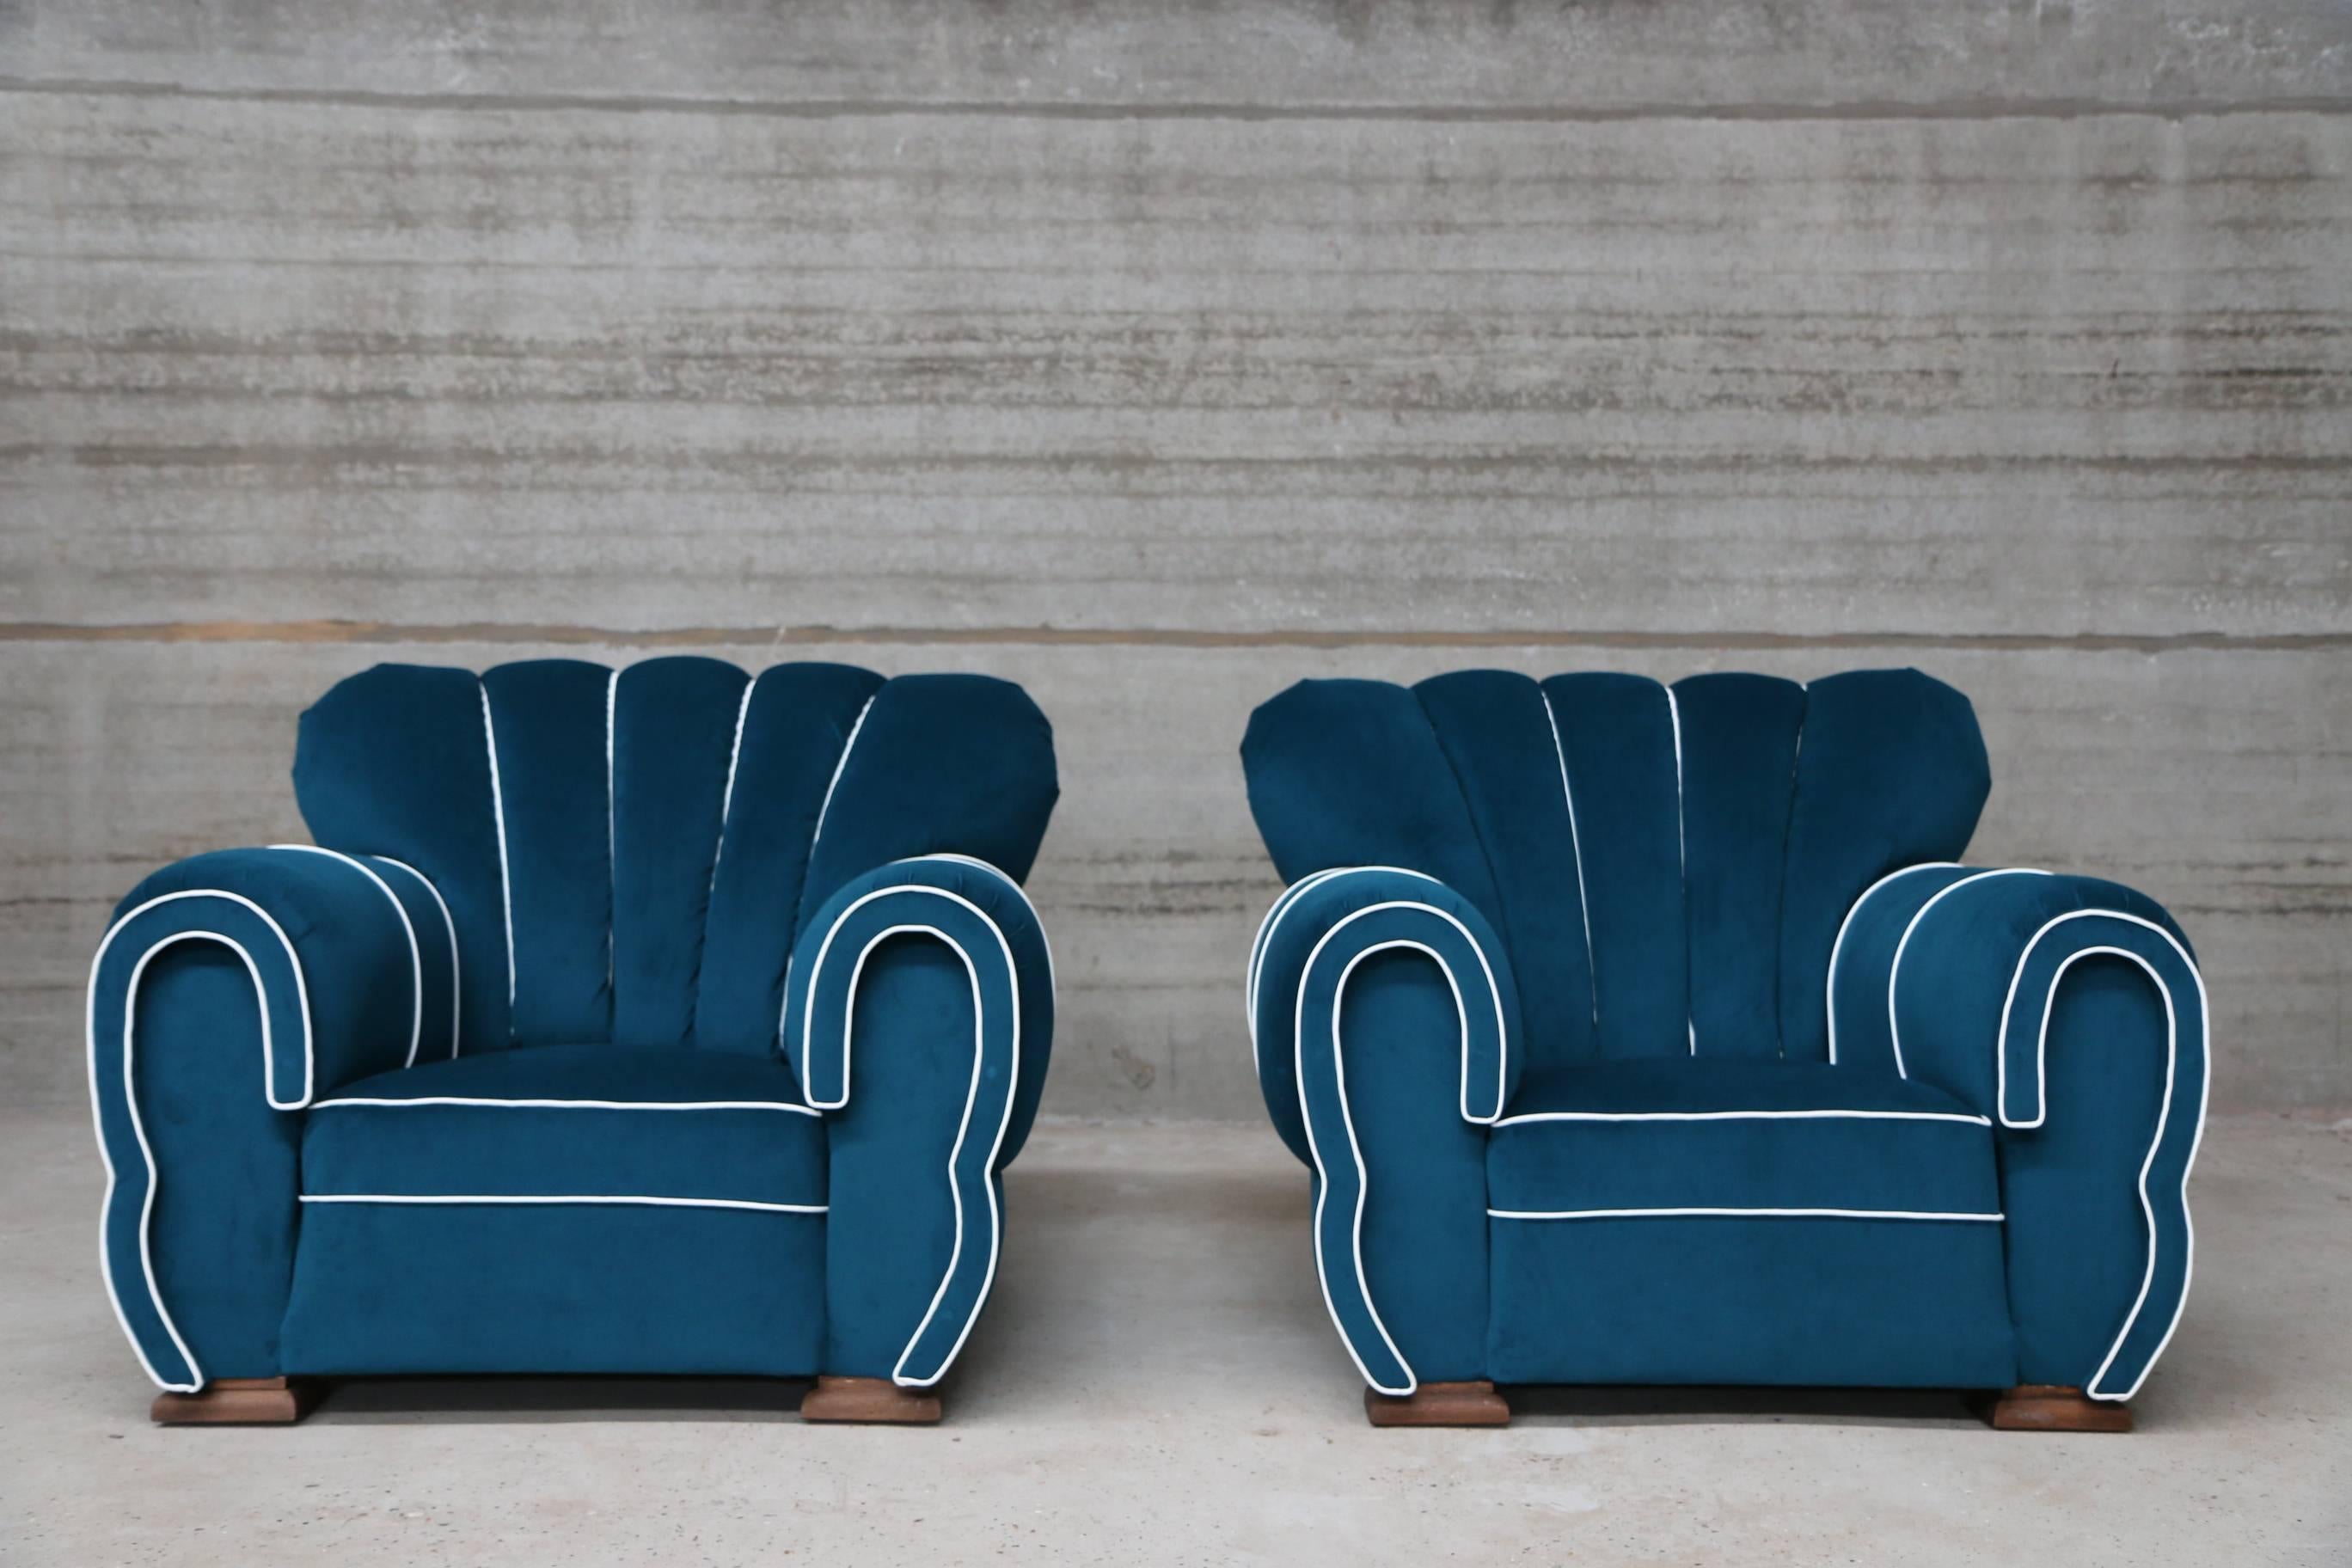 Stunning Pair of Fully Restored French Art Deco Oversized 